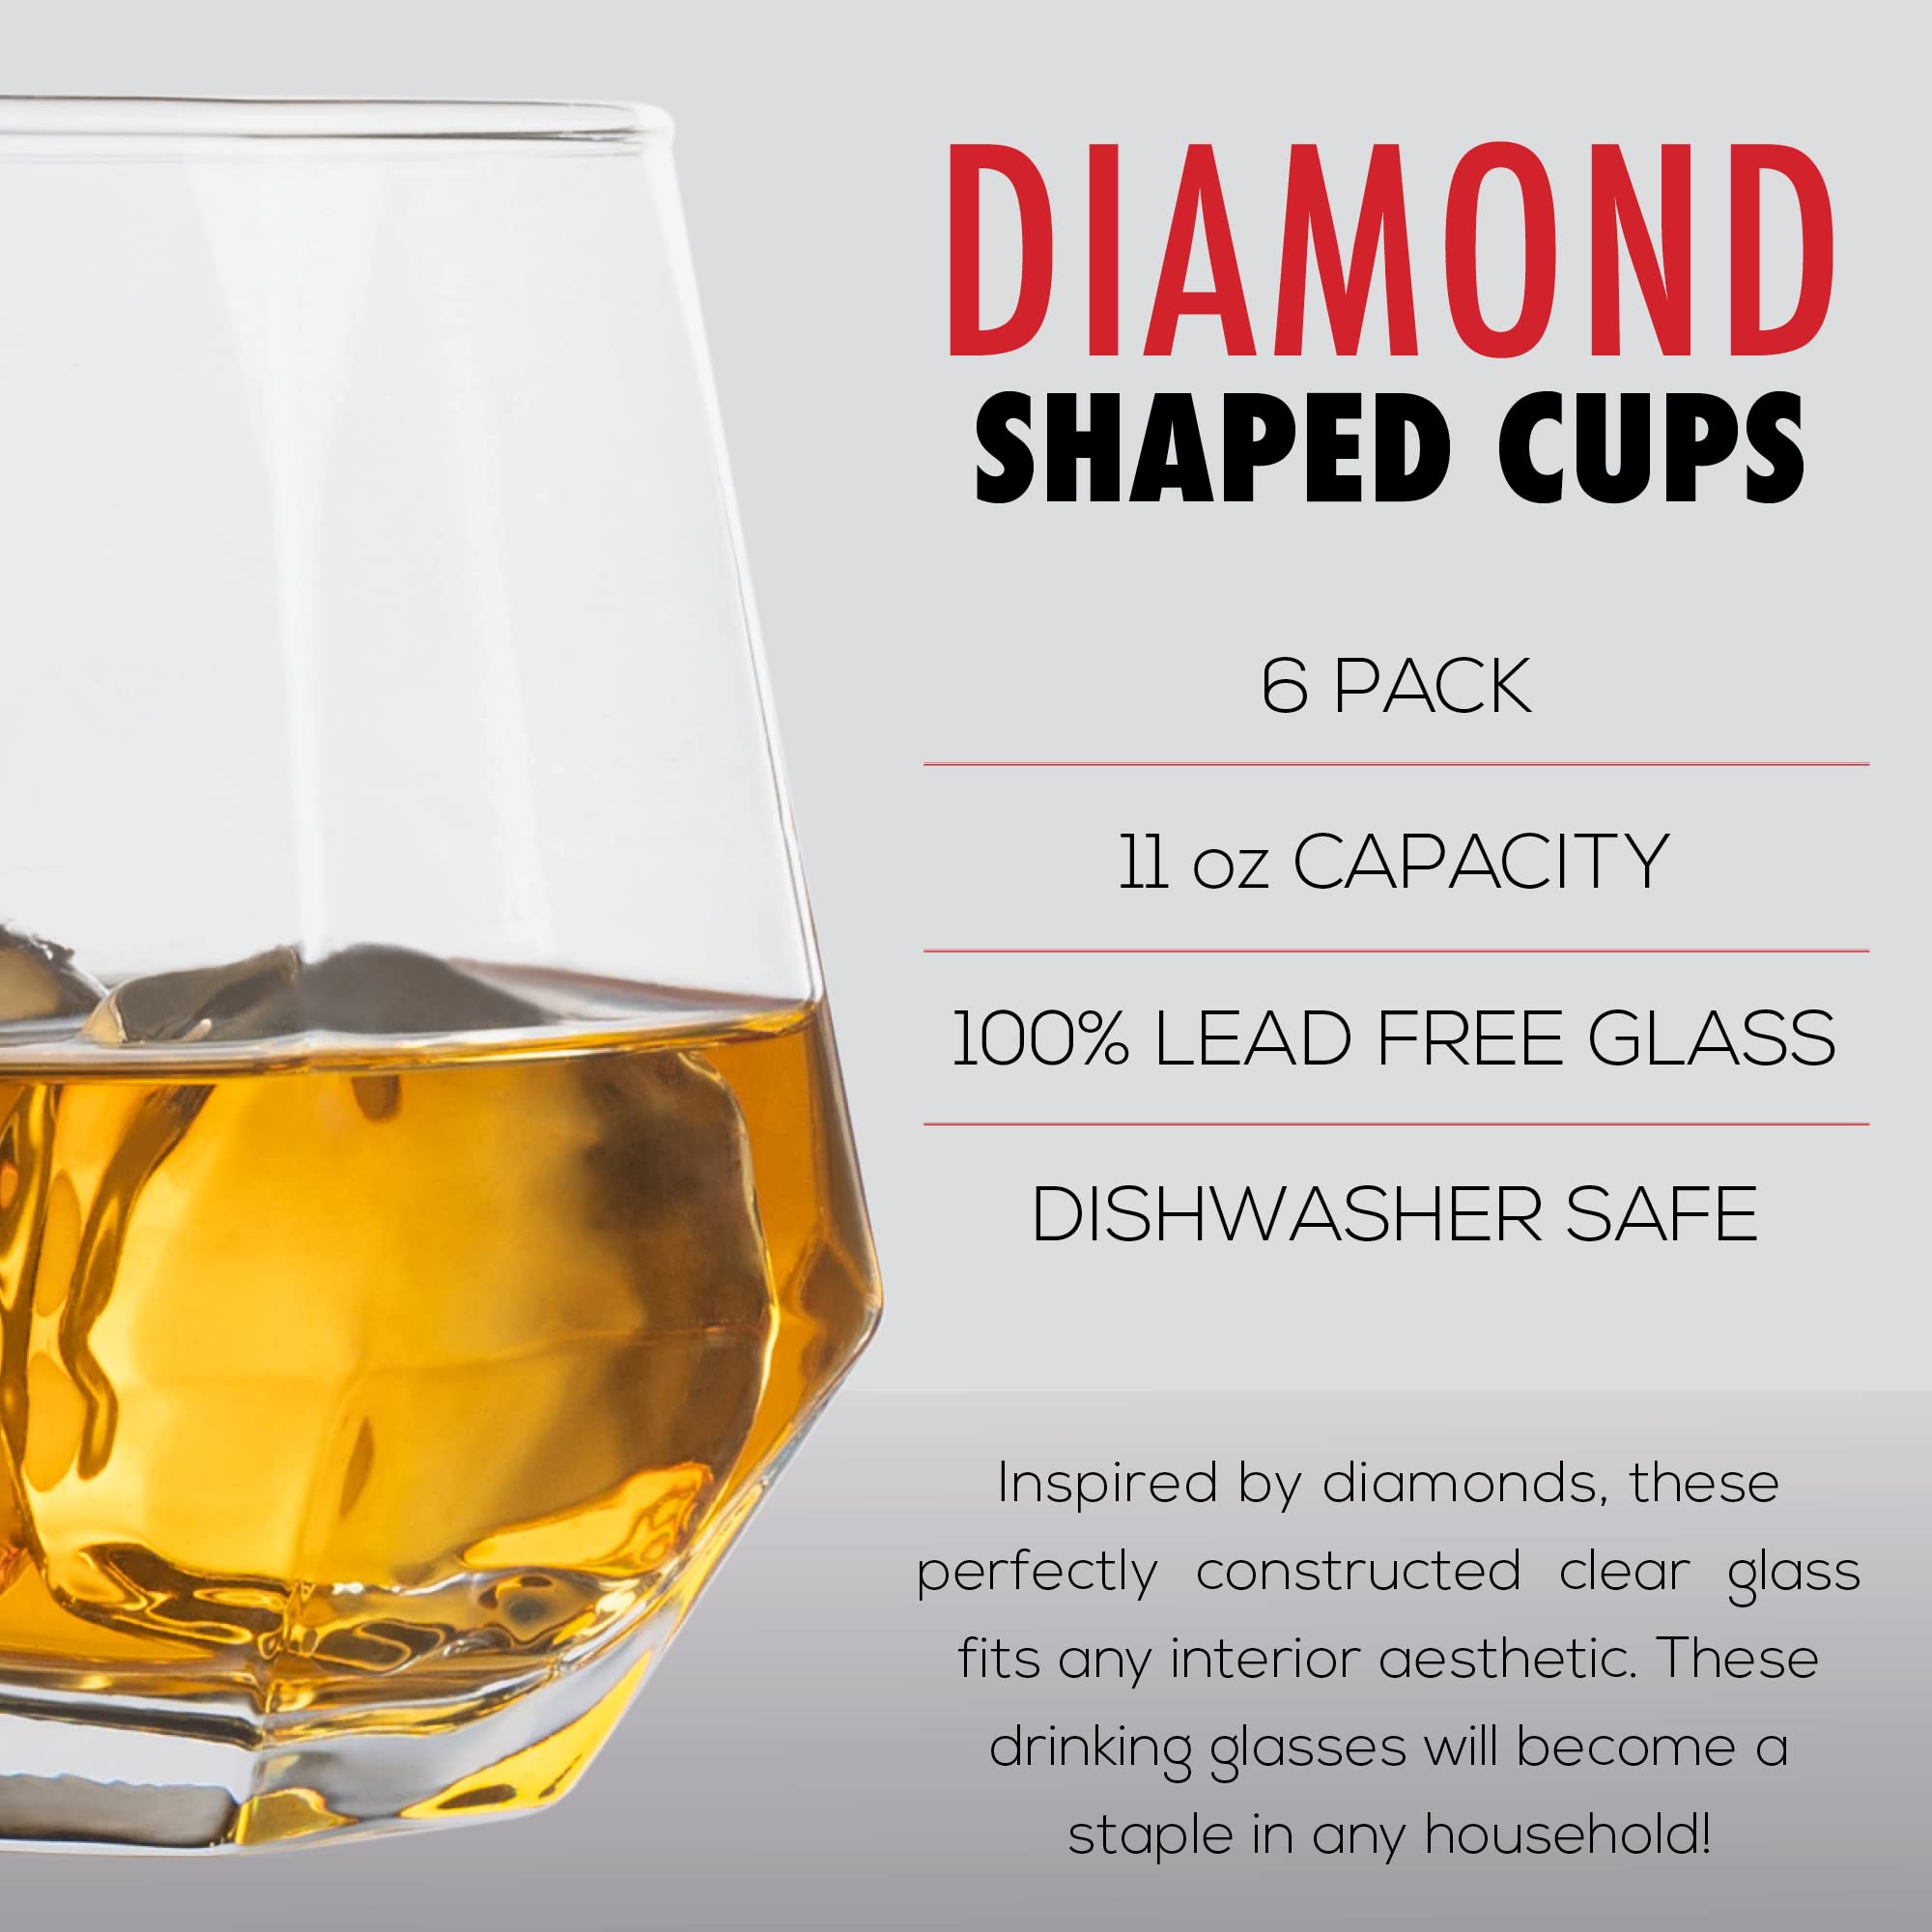 Diamond Whiskey Glasses - Stemless Wine Glass Set of 2- Geometric Tilting Design- Rolling Whiskey Glasses -Stem Less Anti Rocking Cup Diamonds Shaped Tilted Glassware Drinking Tumblers for Wiskey/Wine